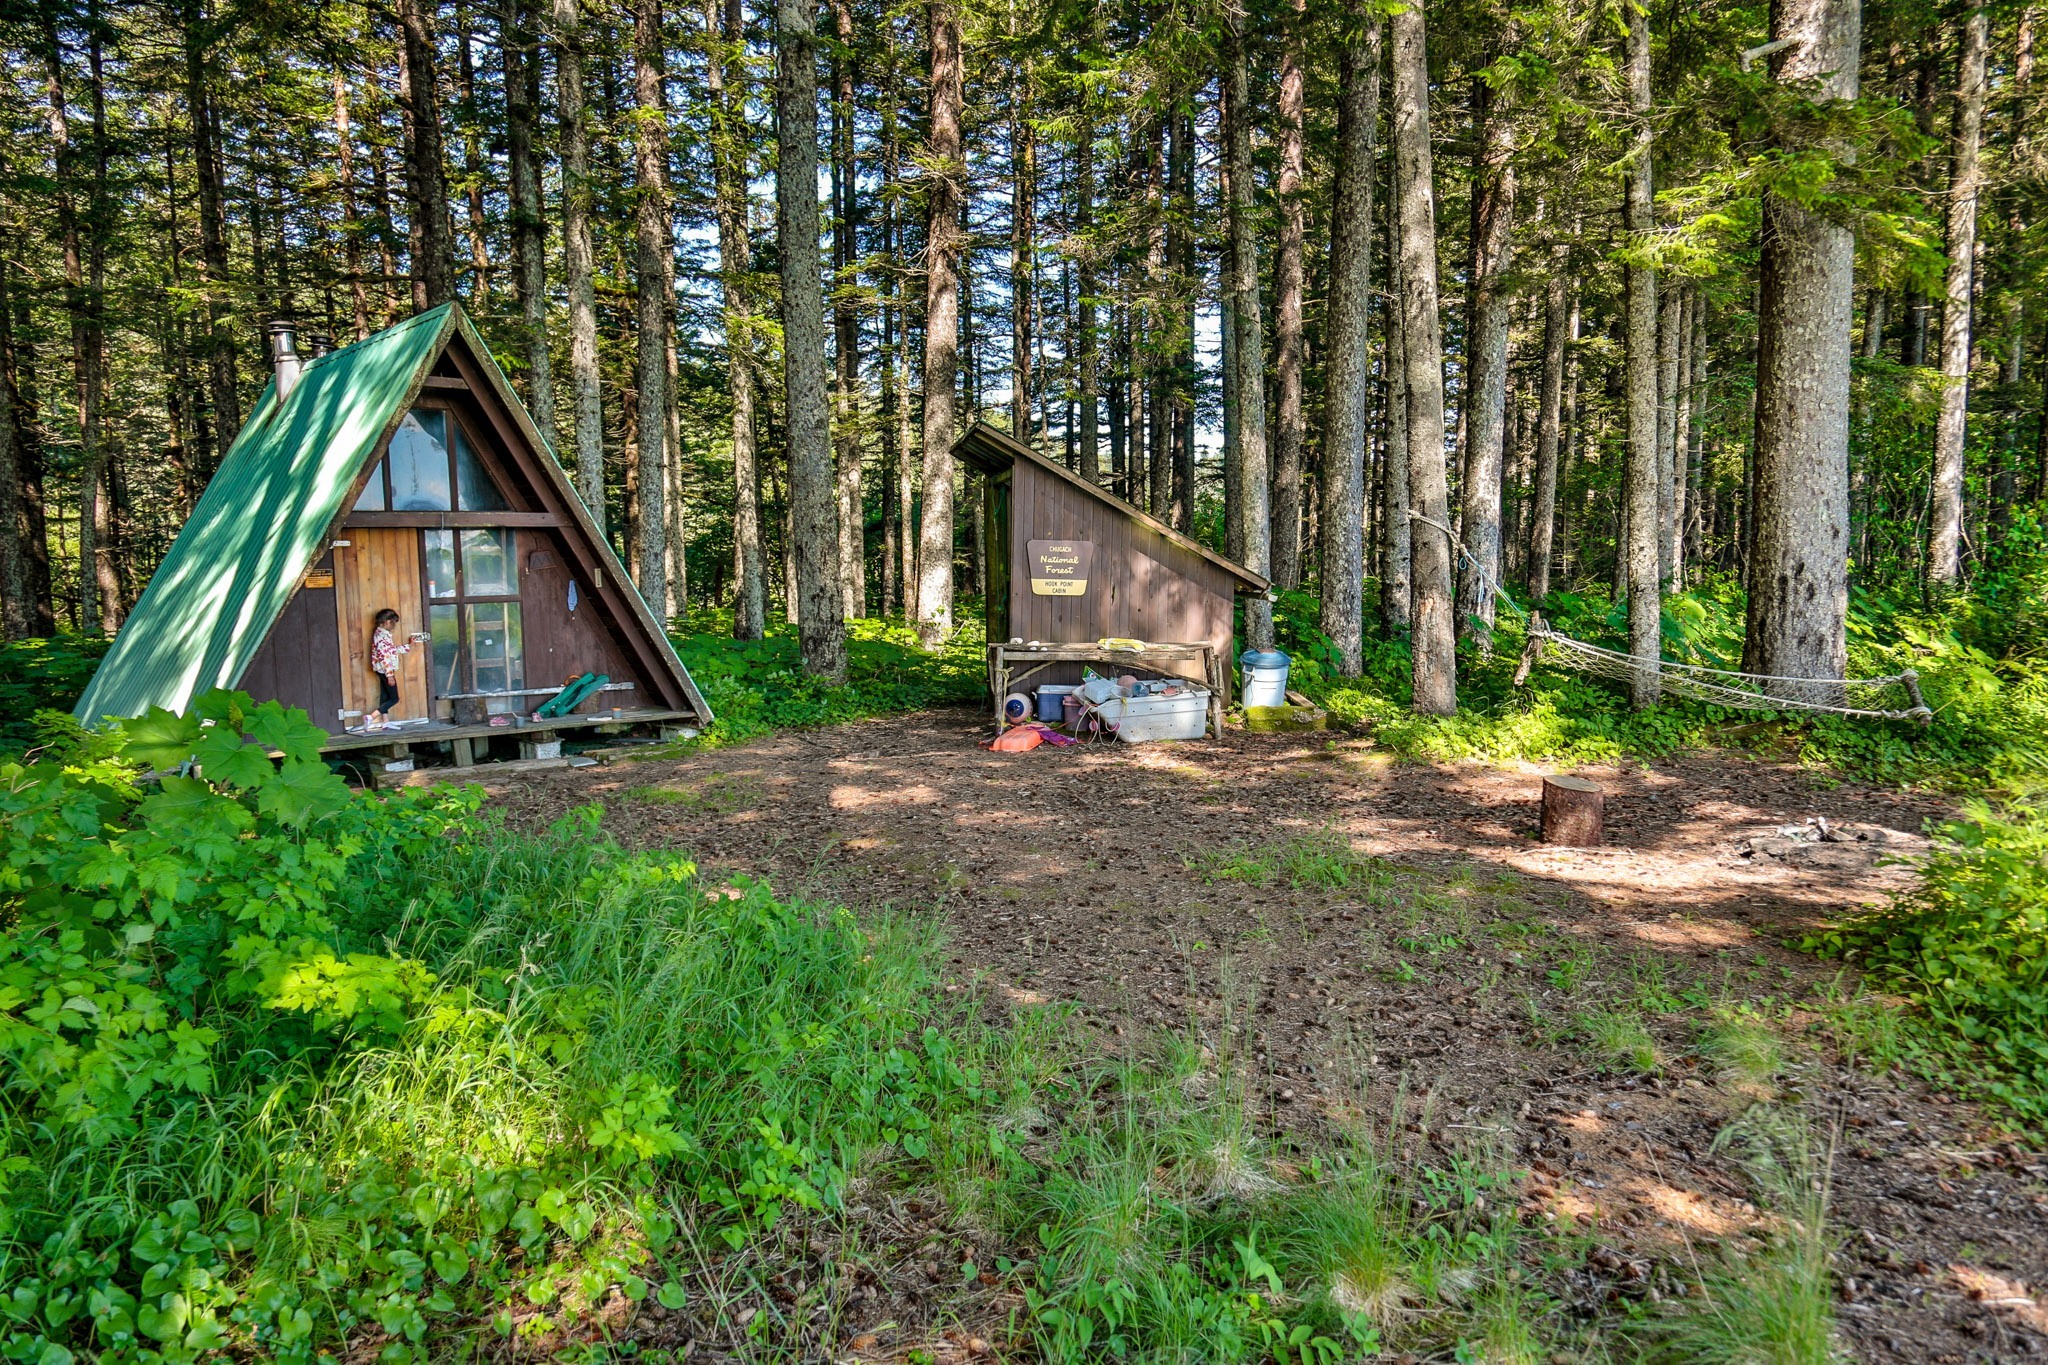 A small A-frame cabin in the woods.